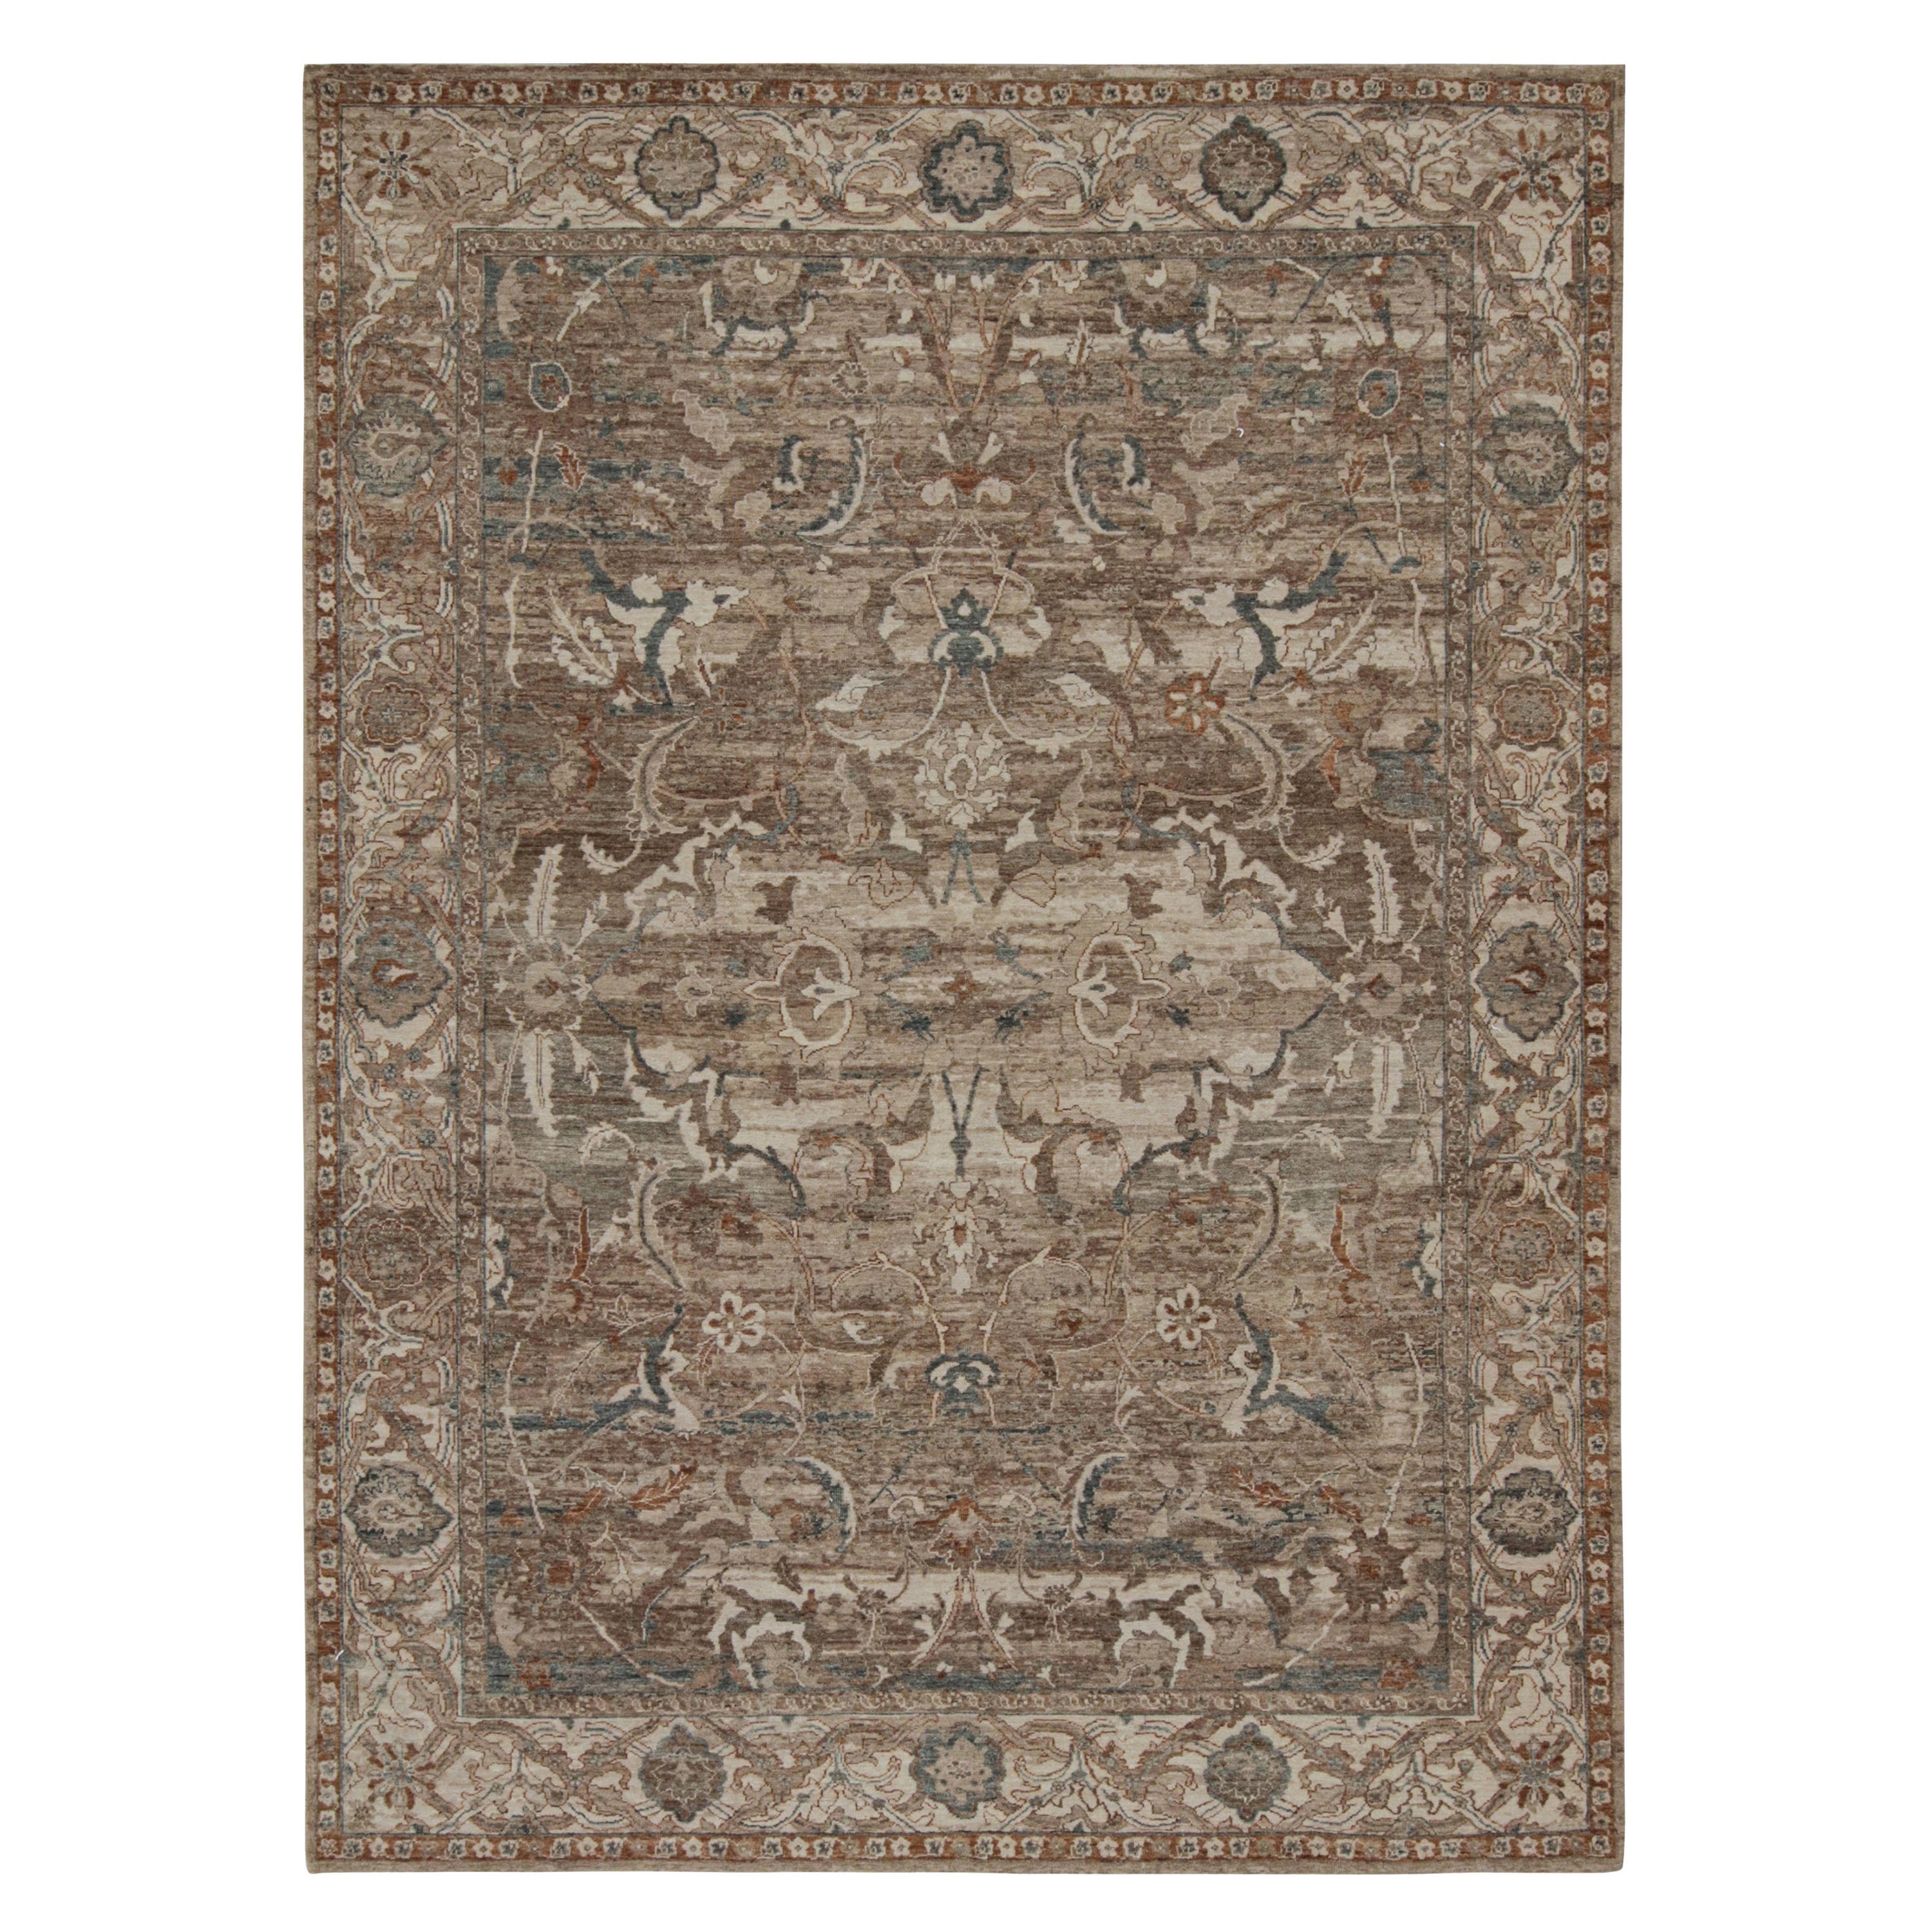 Rug & Kilim’s Modern Classics Rug with Beige-Brown and Navy Blue Floral Patterns